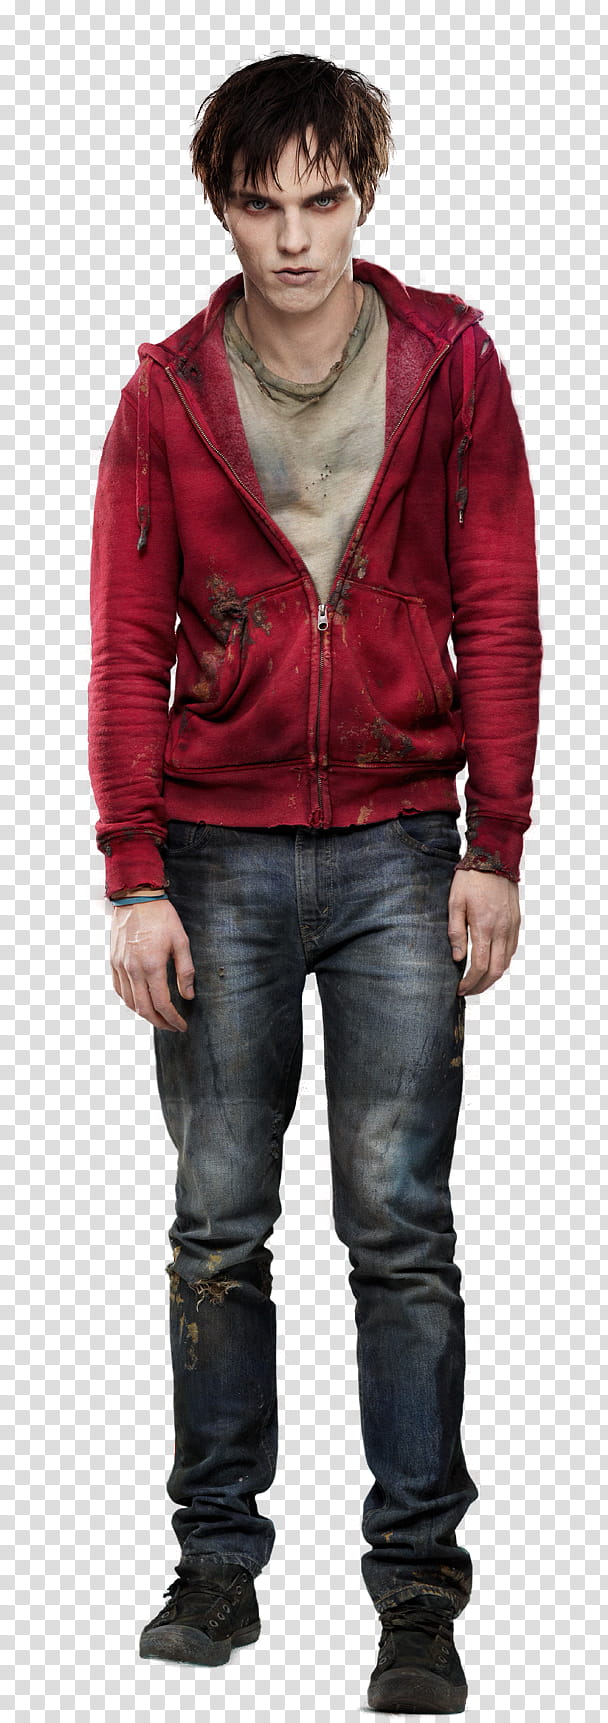 Warm Bodies, Warm Bodies main character transparent background PNG clipart